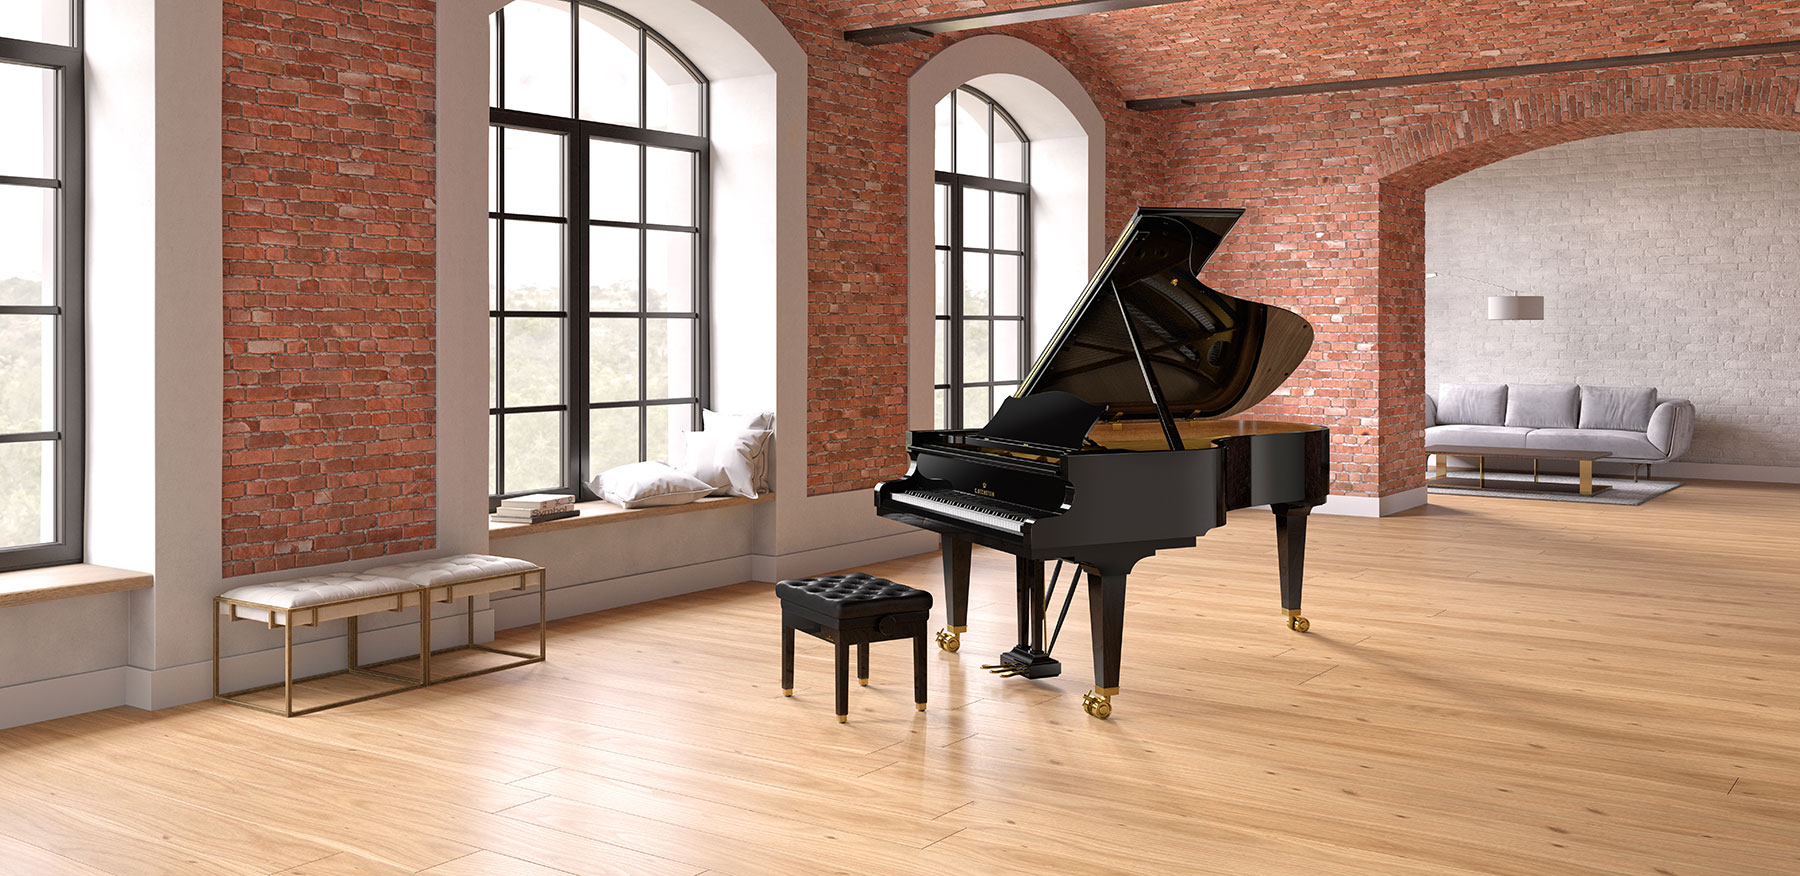 C. Bechstein grand piano in a loft space